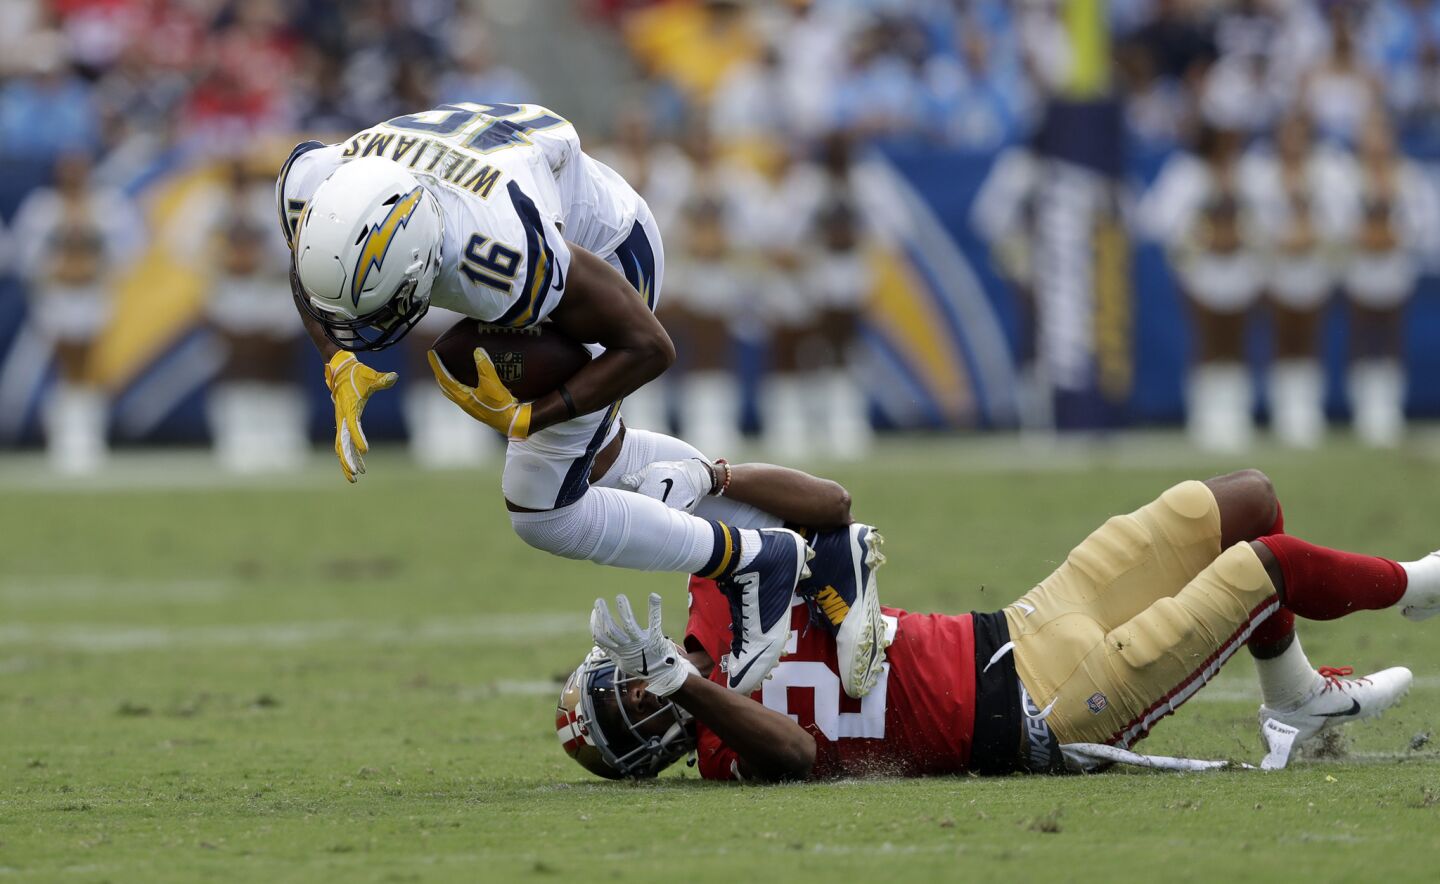 Los Angeles Chargers wide receiver Tyrell Williams, left, is tackled by San Francisco 49ers cornerback Ahkello Witherspoon during the first half of an NFL football game, Sunday, Sept. 30, 2018, in Carson, Calif.